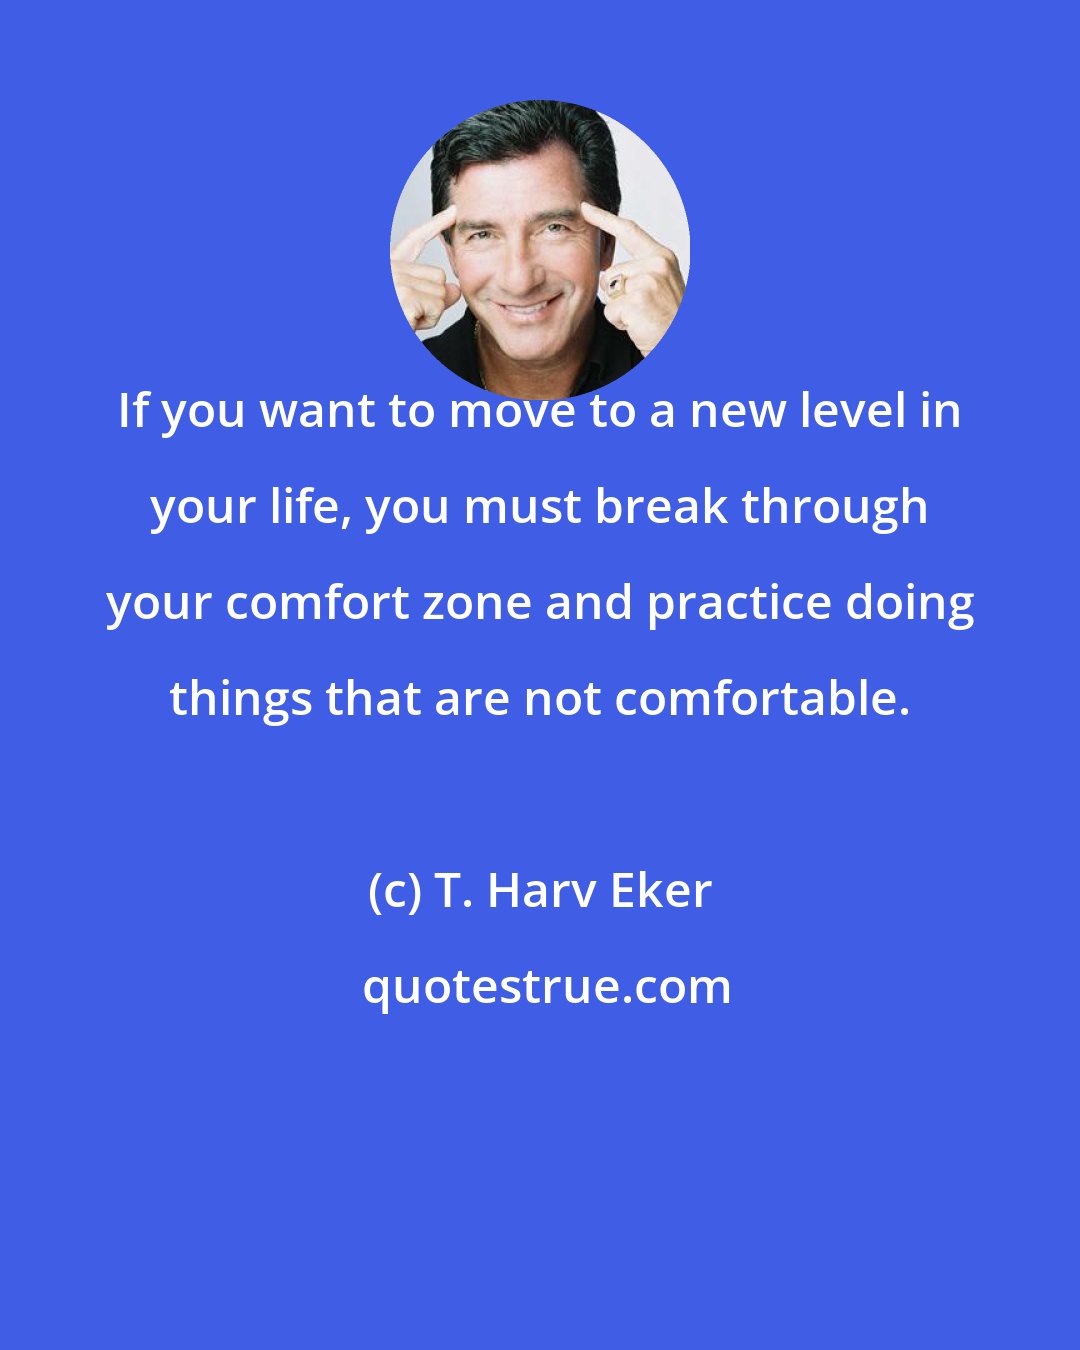 T. Harv Eker: If you want to move to a new level in your life, you must break through your comfort zone and practice doing things that are not comfortable.